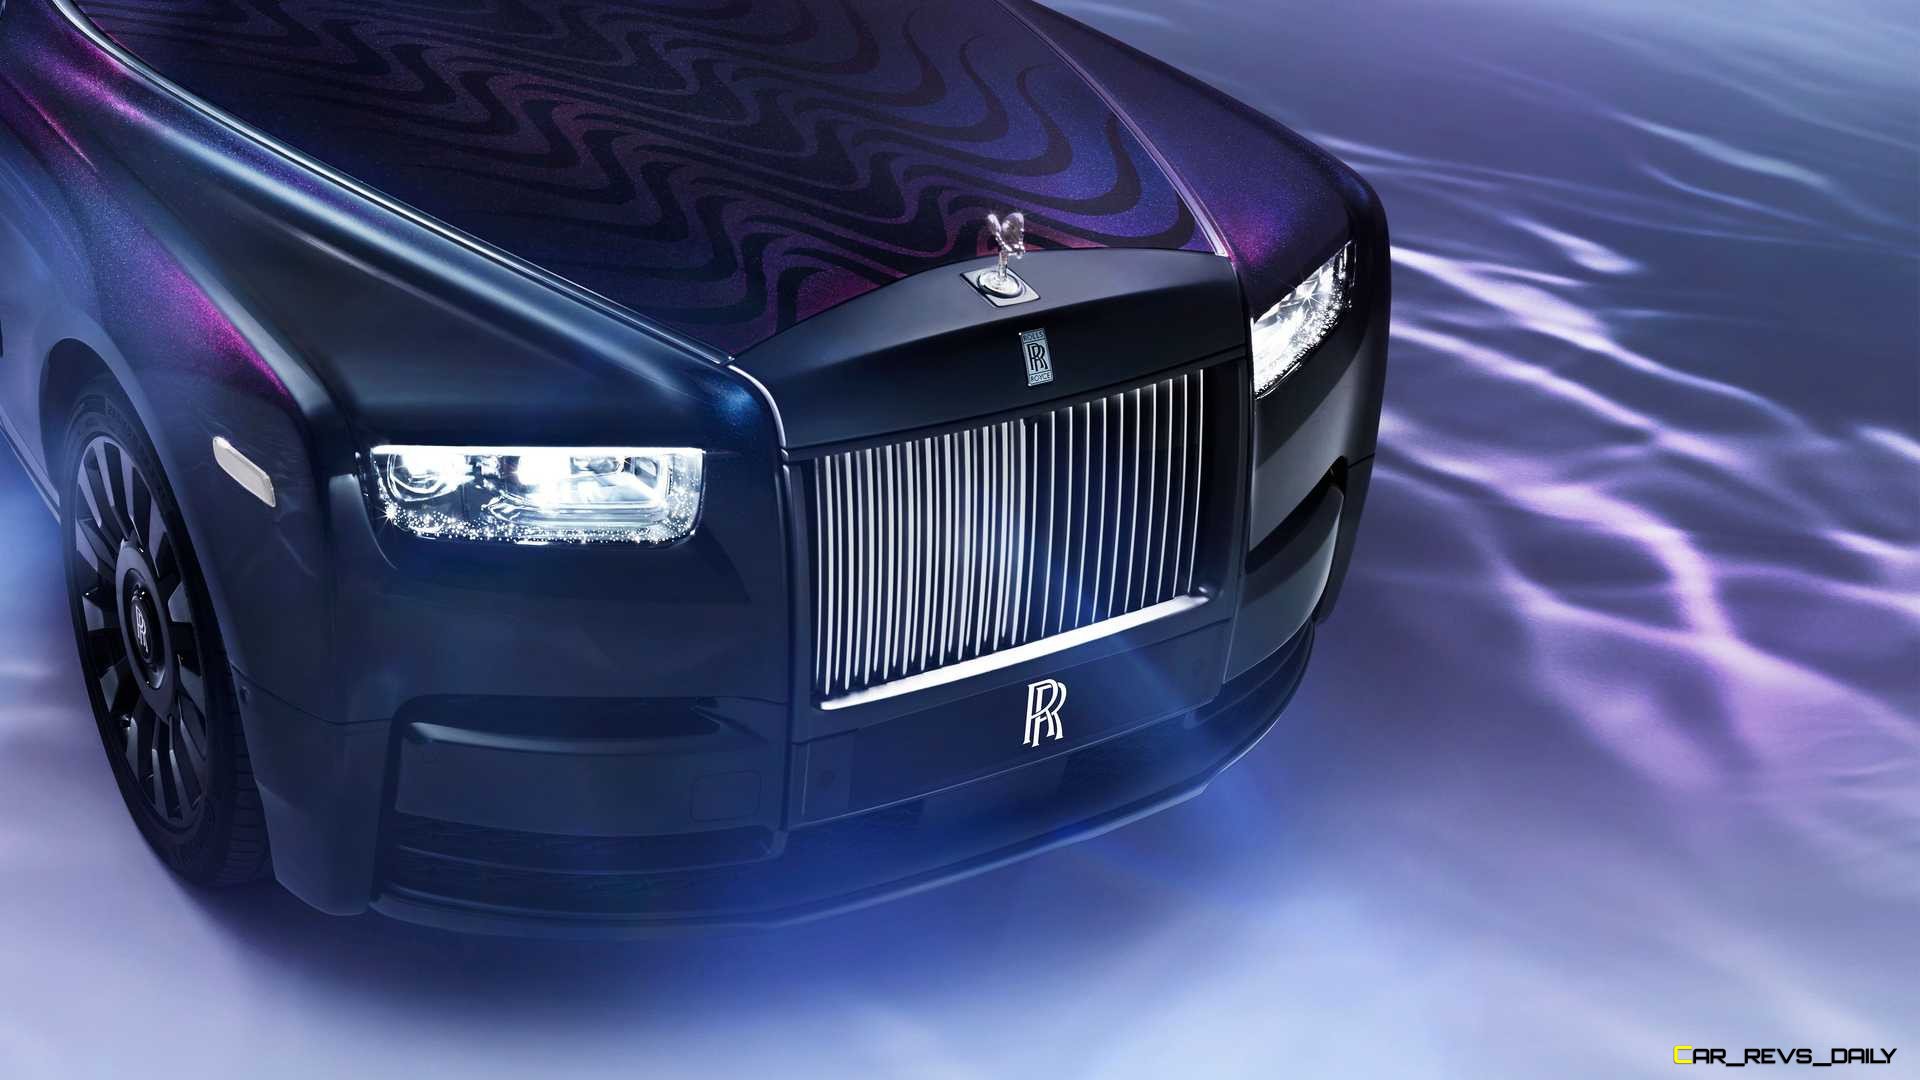 BRABUS 700 - Rolls Royce Ghost Extended - Cars for Sale - Cars - BRABUS